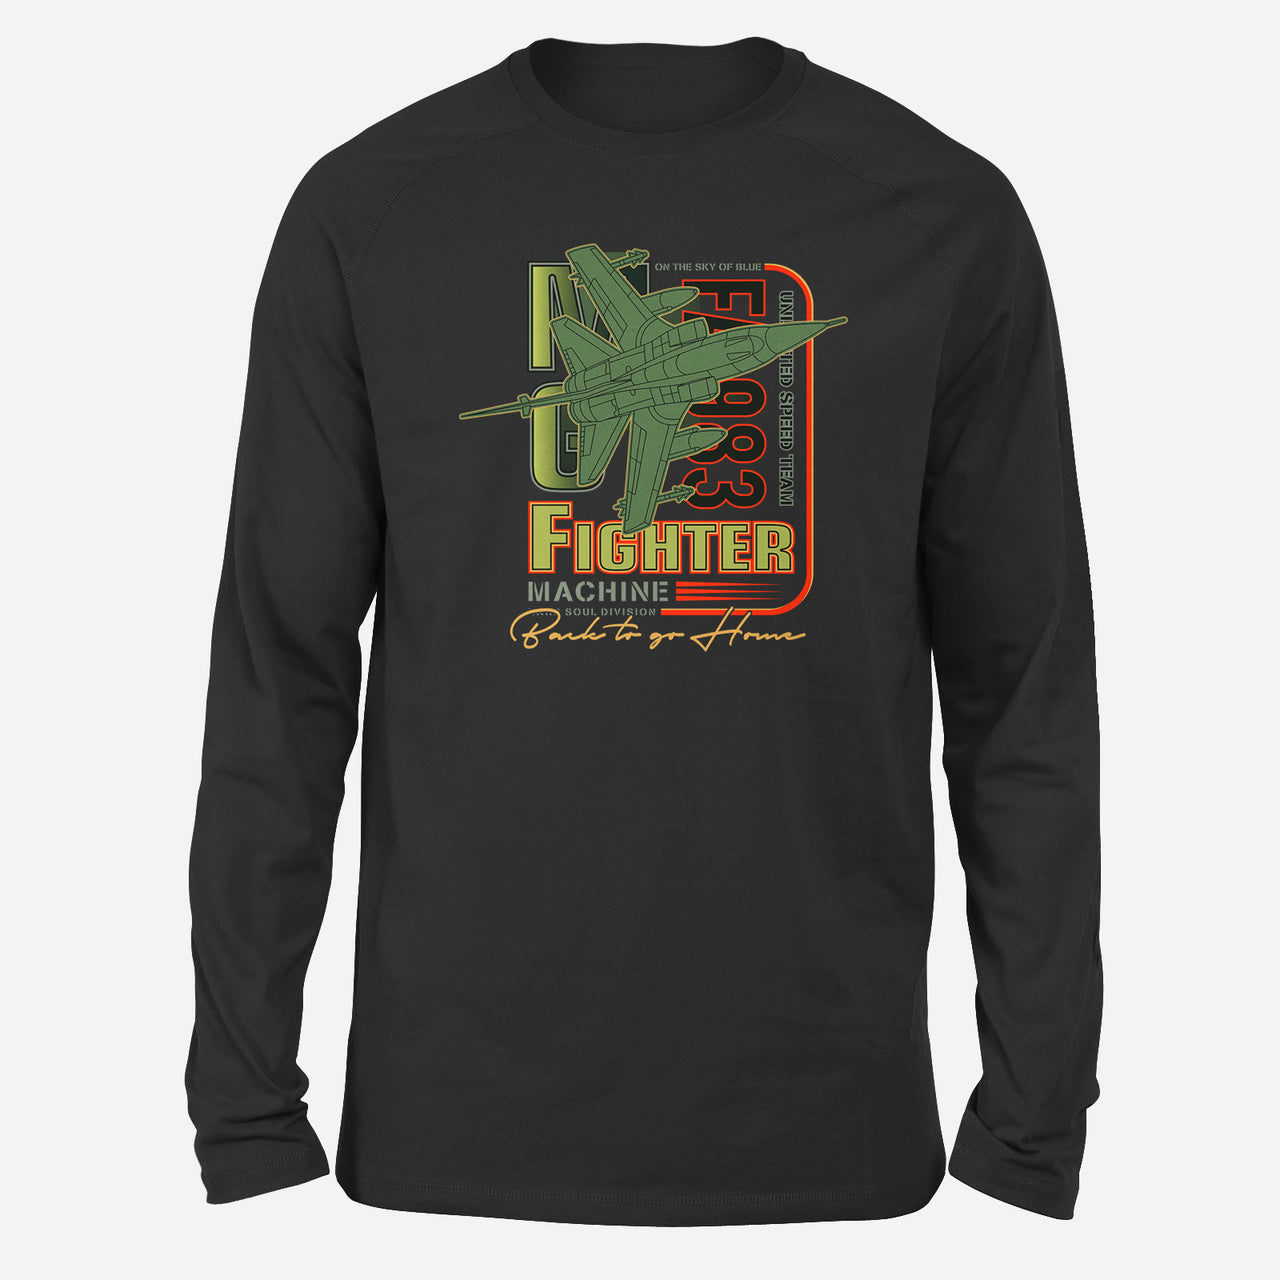 Fighter Machine Designed Long-Sleeve T-Shirts